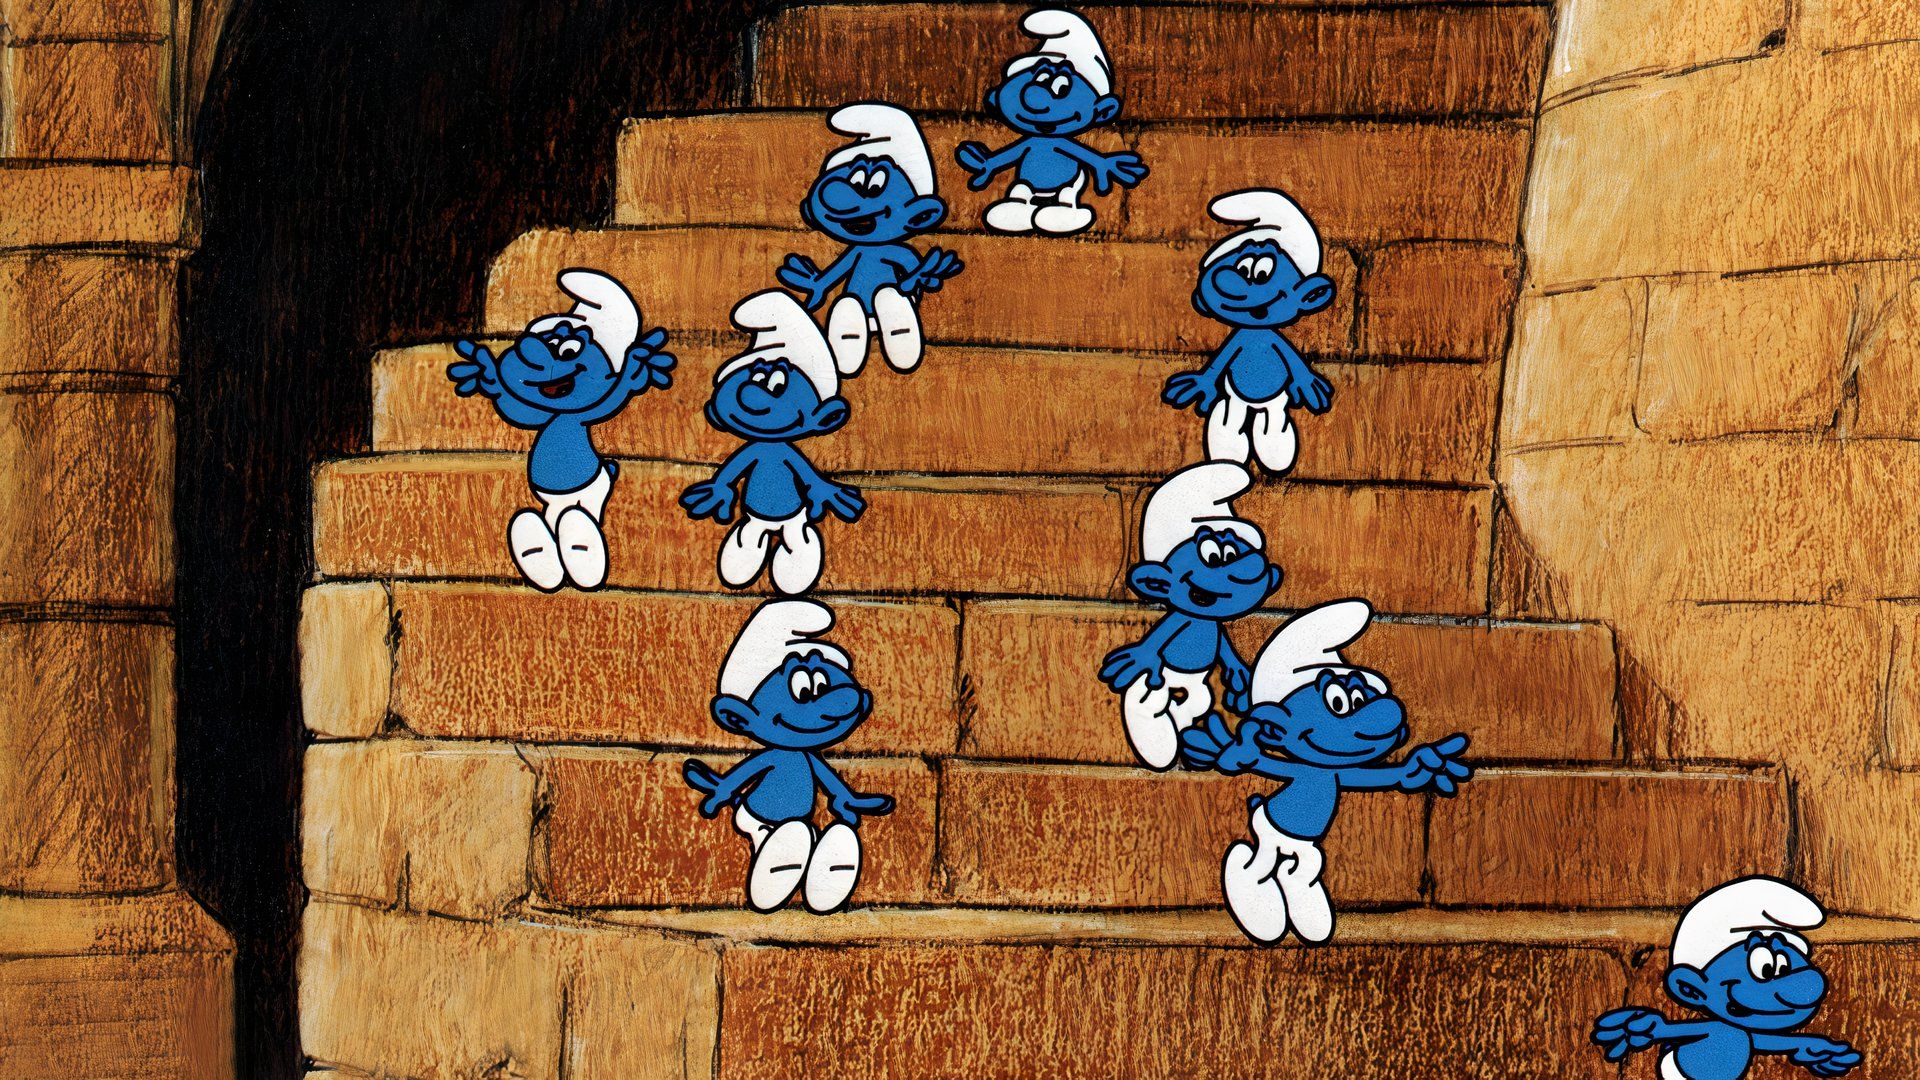 The Smurfs walk down the stairs in The Smurfs